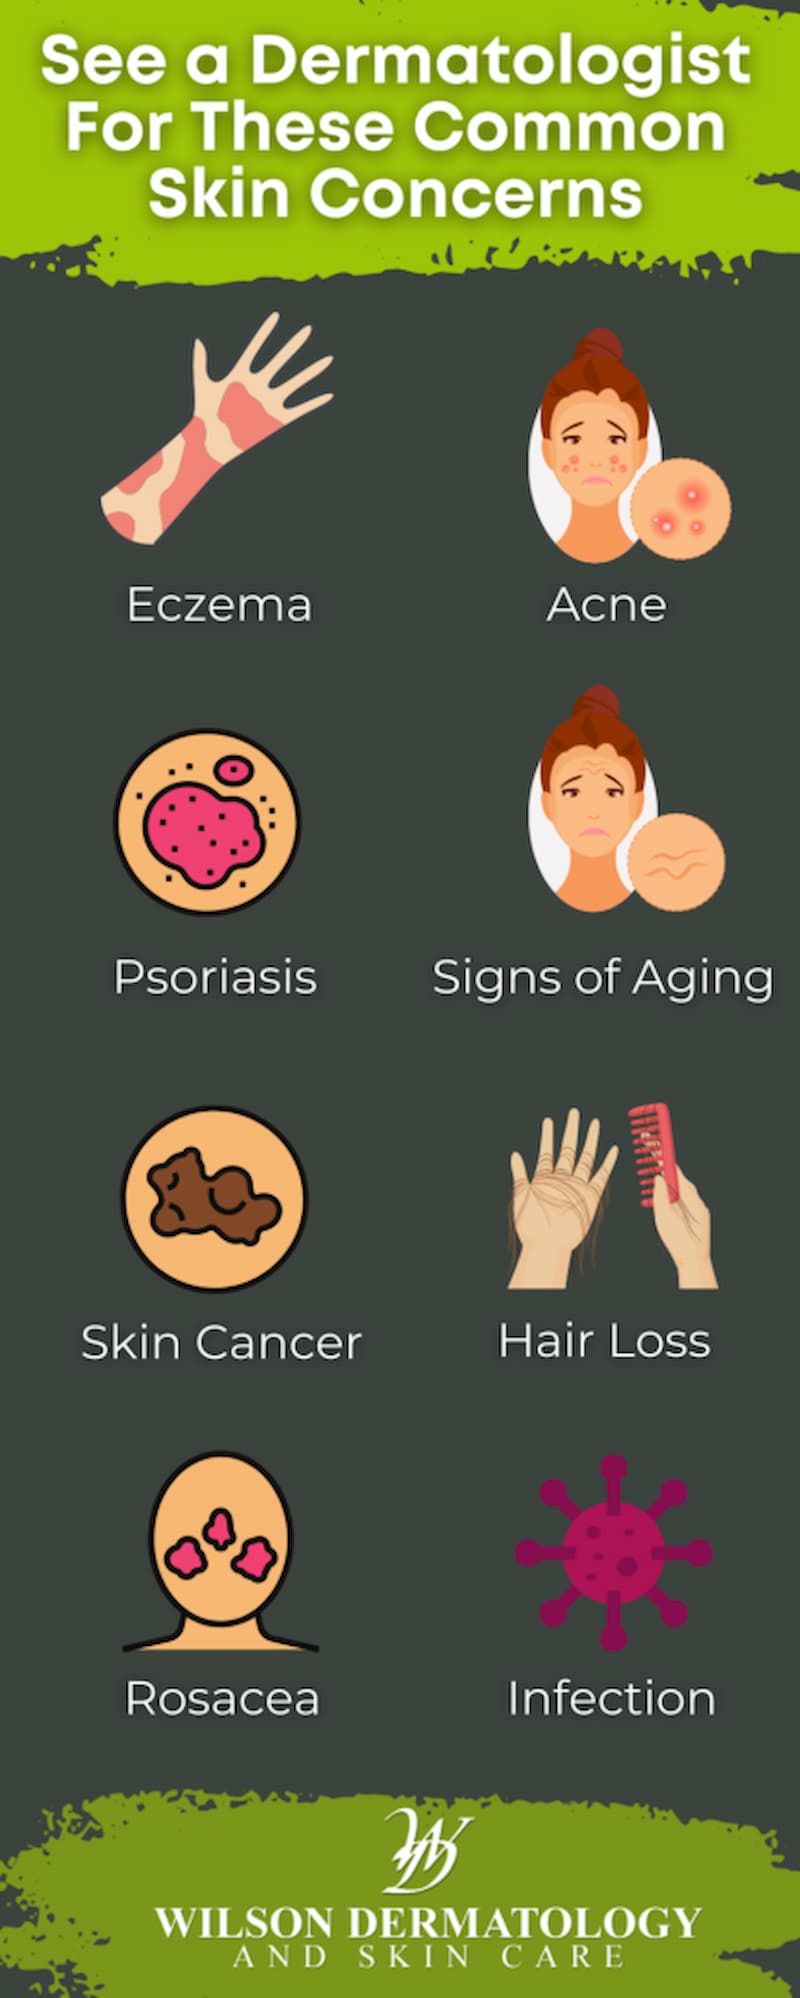 Common skin conditions that a dermatologist can treat